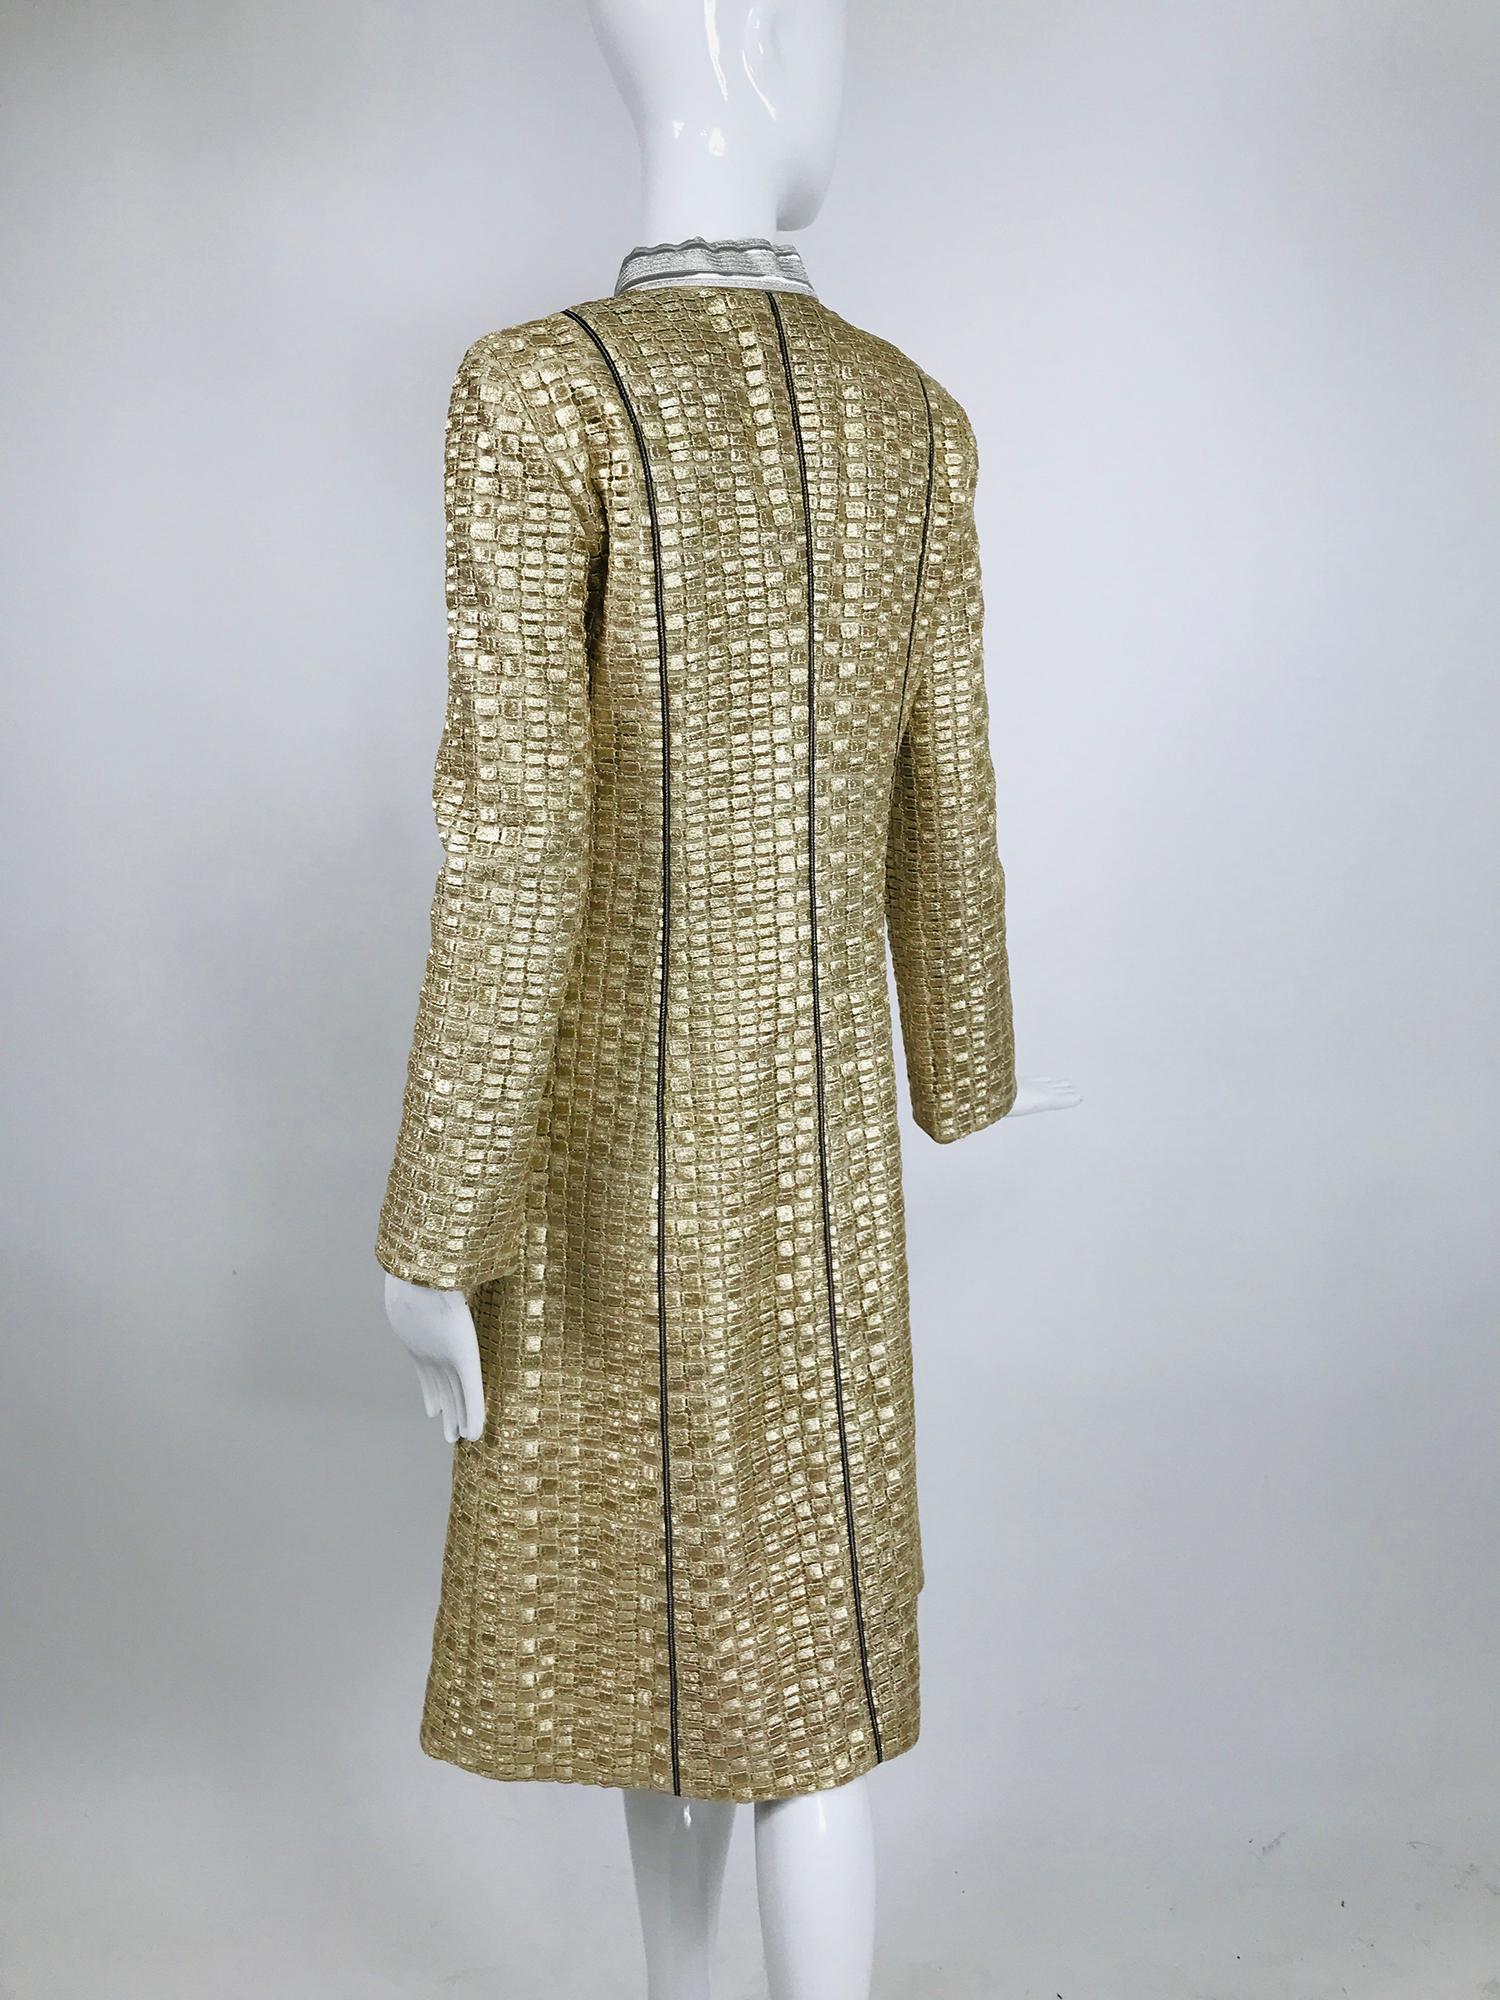 Marc Jacobs Gold and Silver Metallic 4 Pocket Coat In Excellent Condition For Sale In West Palm Beach, FL